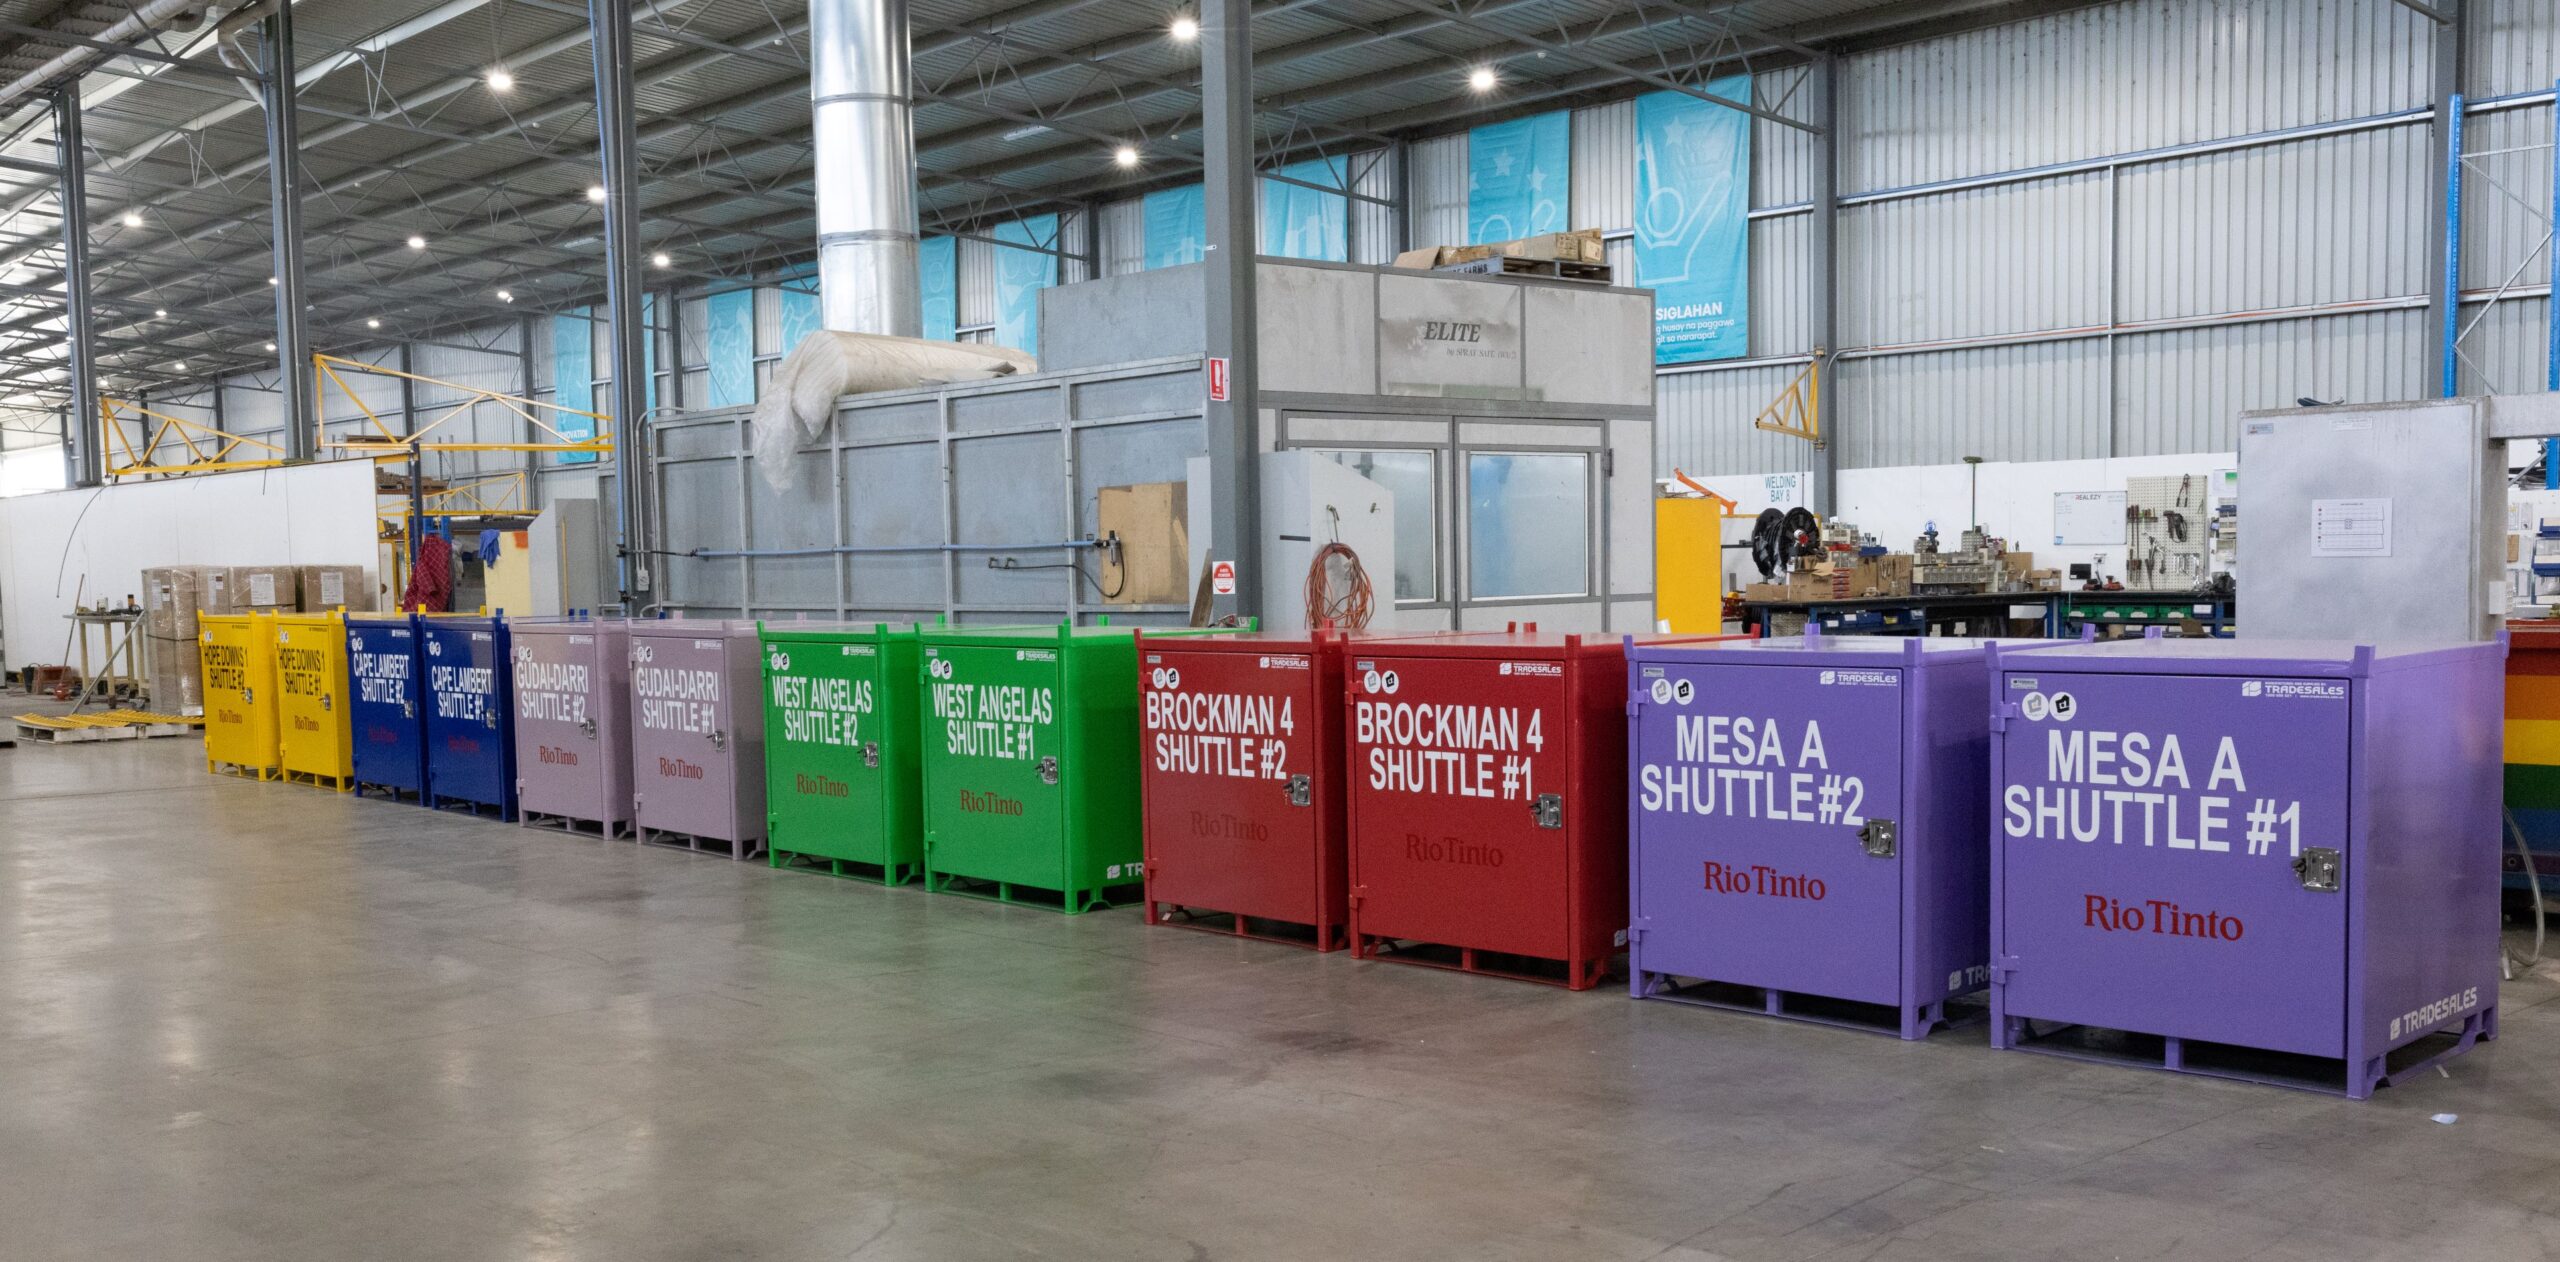 Rio Tinto Takes a Heavy-Duty Approach to Reduce Plastic Footprint with Customised Site Boxes